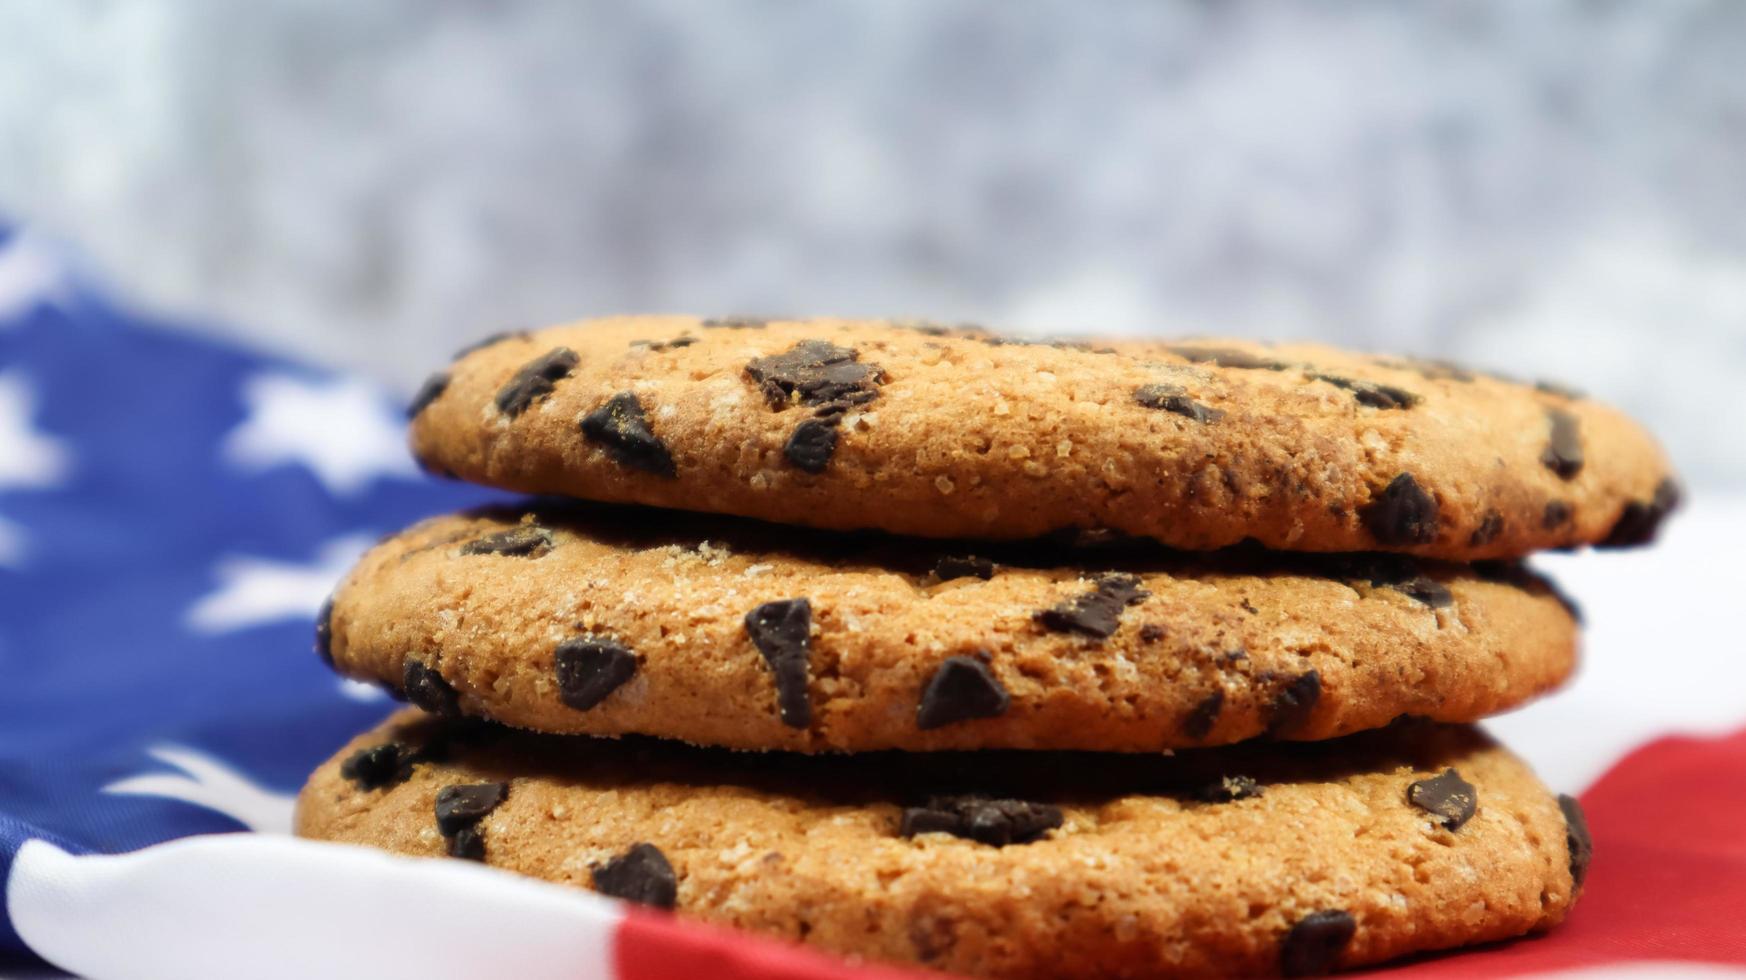 Patriotic cookies. Three rounded traditional chocolate chip cookies on the background of the flag of the United States of America. Delicious sweet pastries, dessert. America's favorite treat. photo